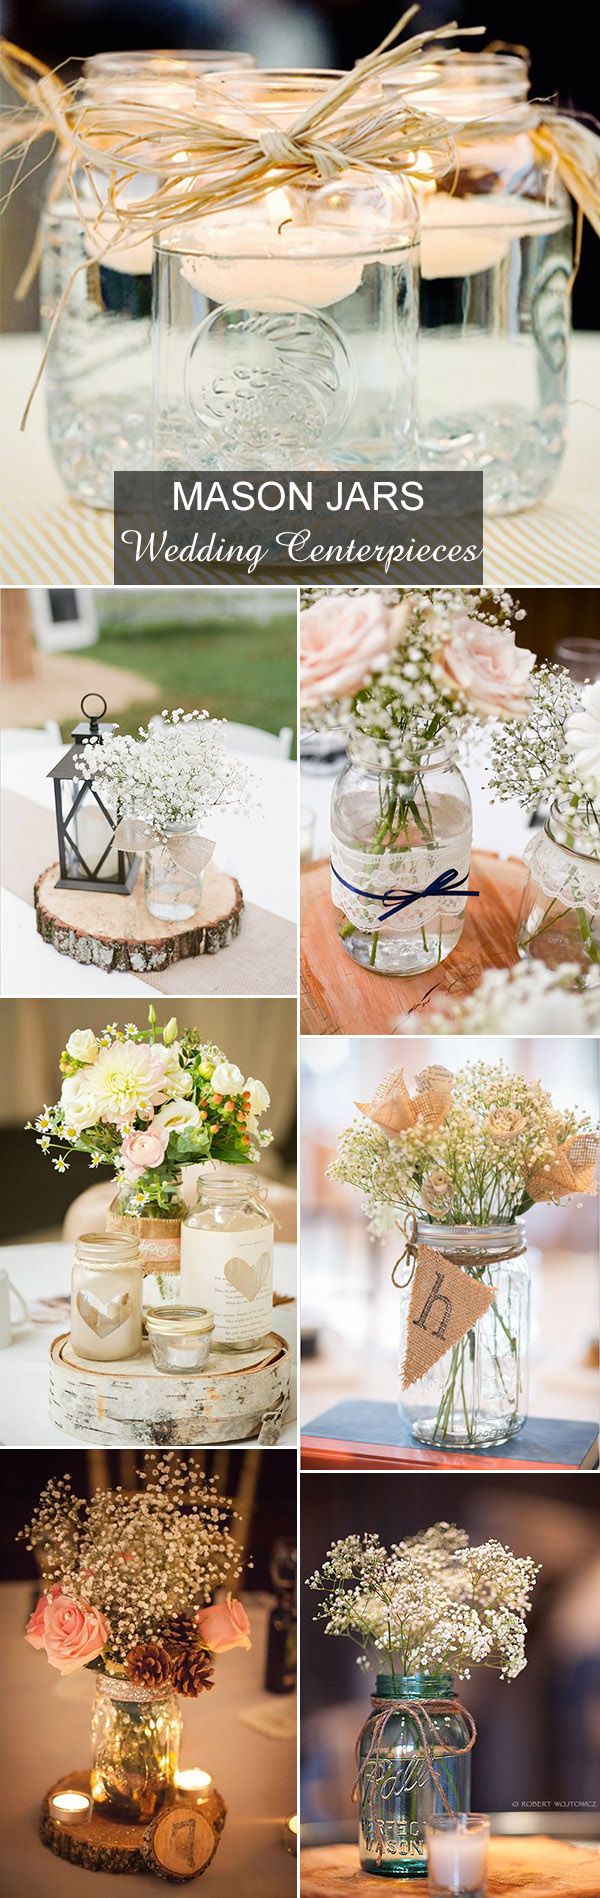 country rustic mason jars inspired wedding centerpieces ideas...